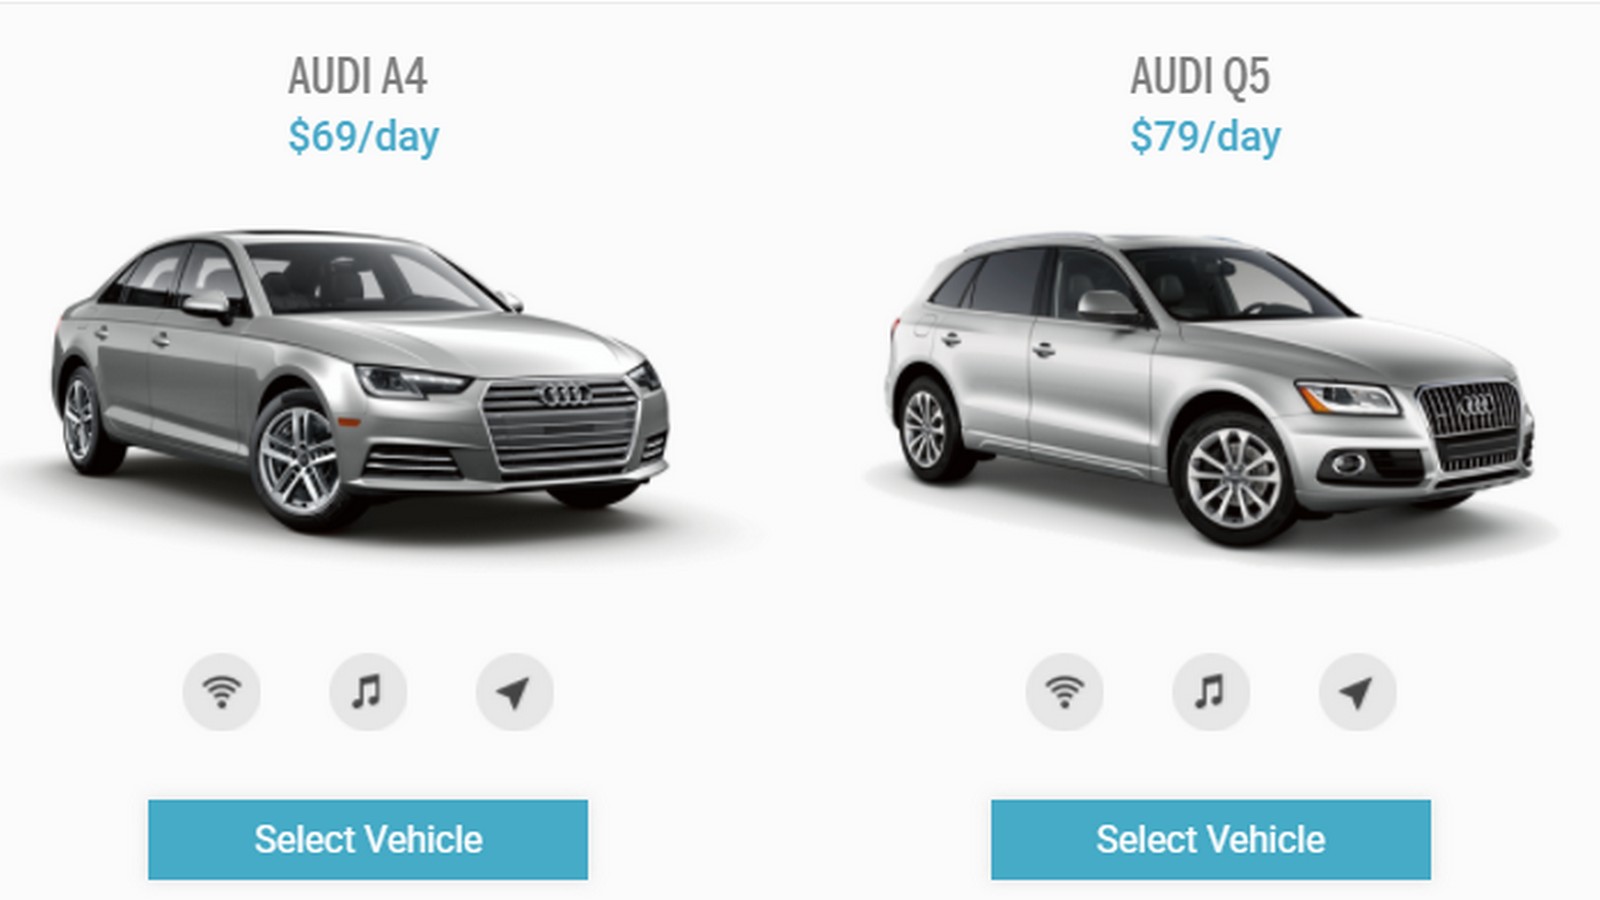 Silvercar Now Offers A SUV, The Audi Q5